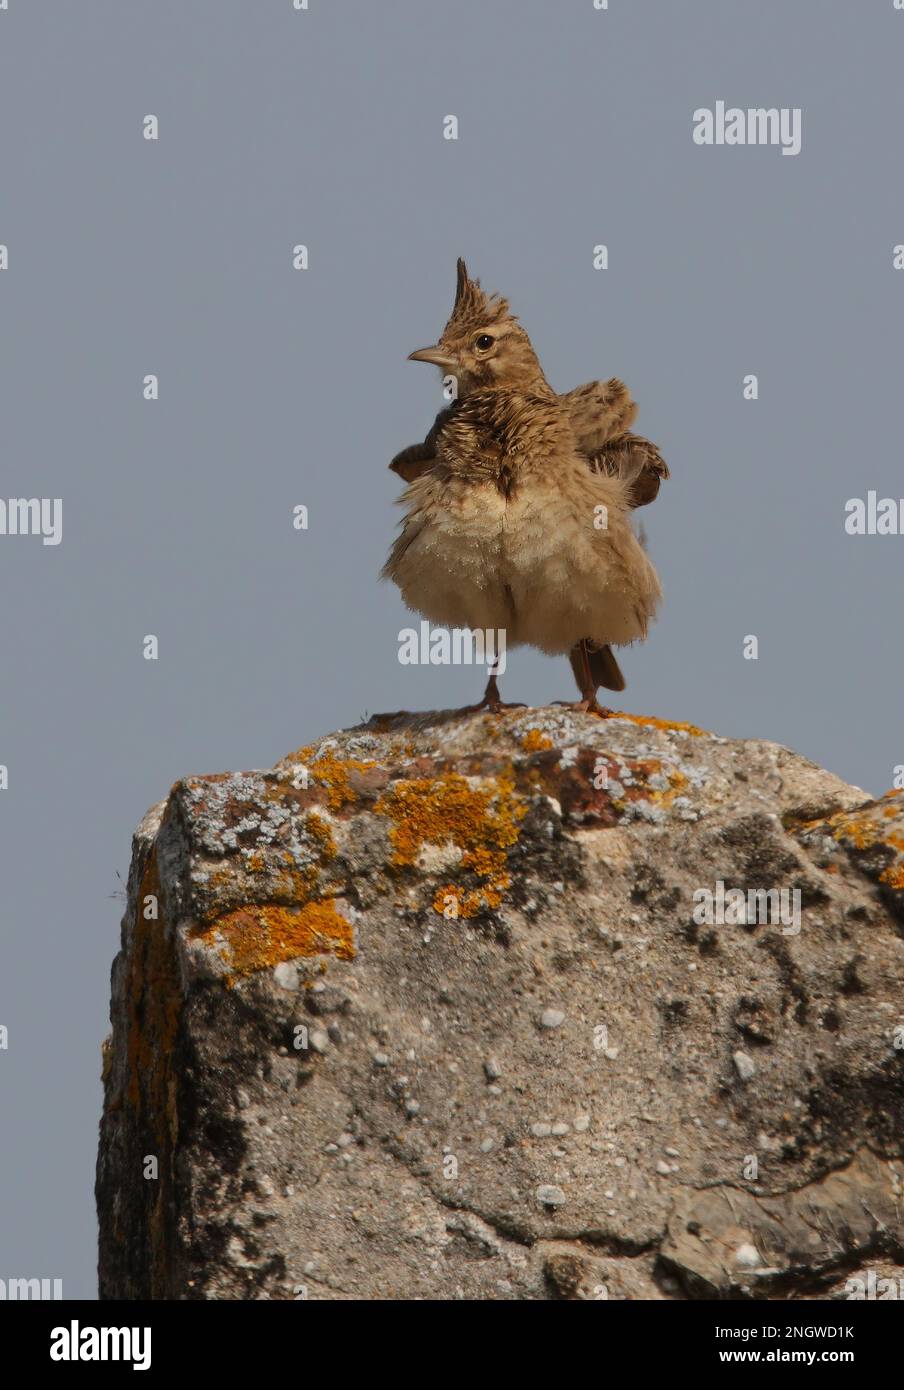 Crested Lark (Galerida cristata pallida) adult perched on lichen covered rock, shaking out feathers  Ria Formosa NP, Algarve, Portugal               A Stock Photo